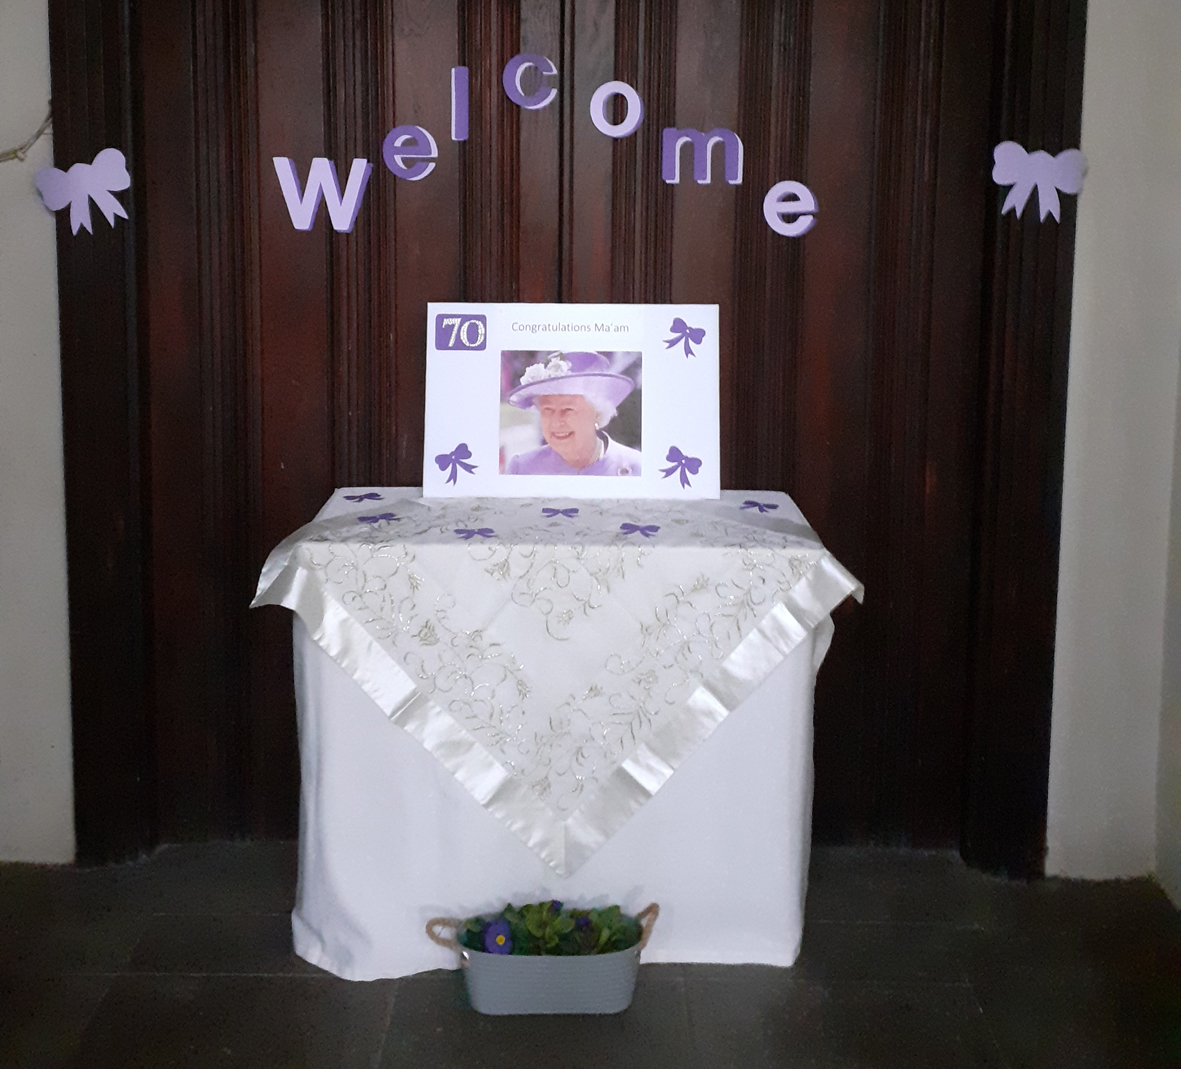 Welcome display at The Holy Innocents